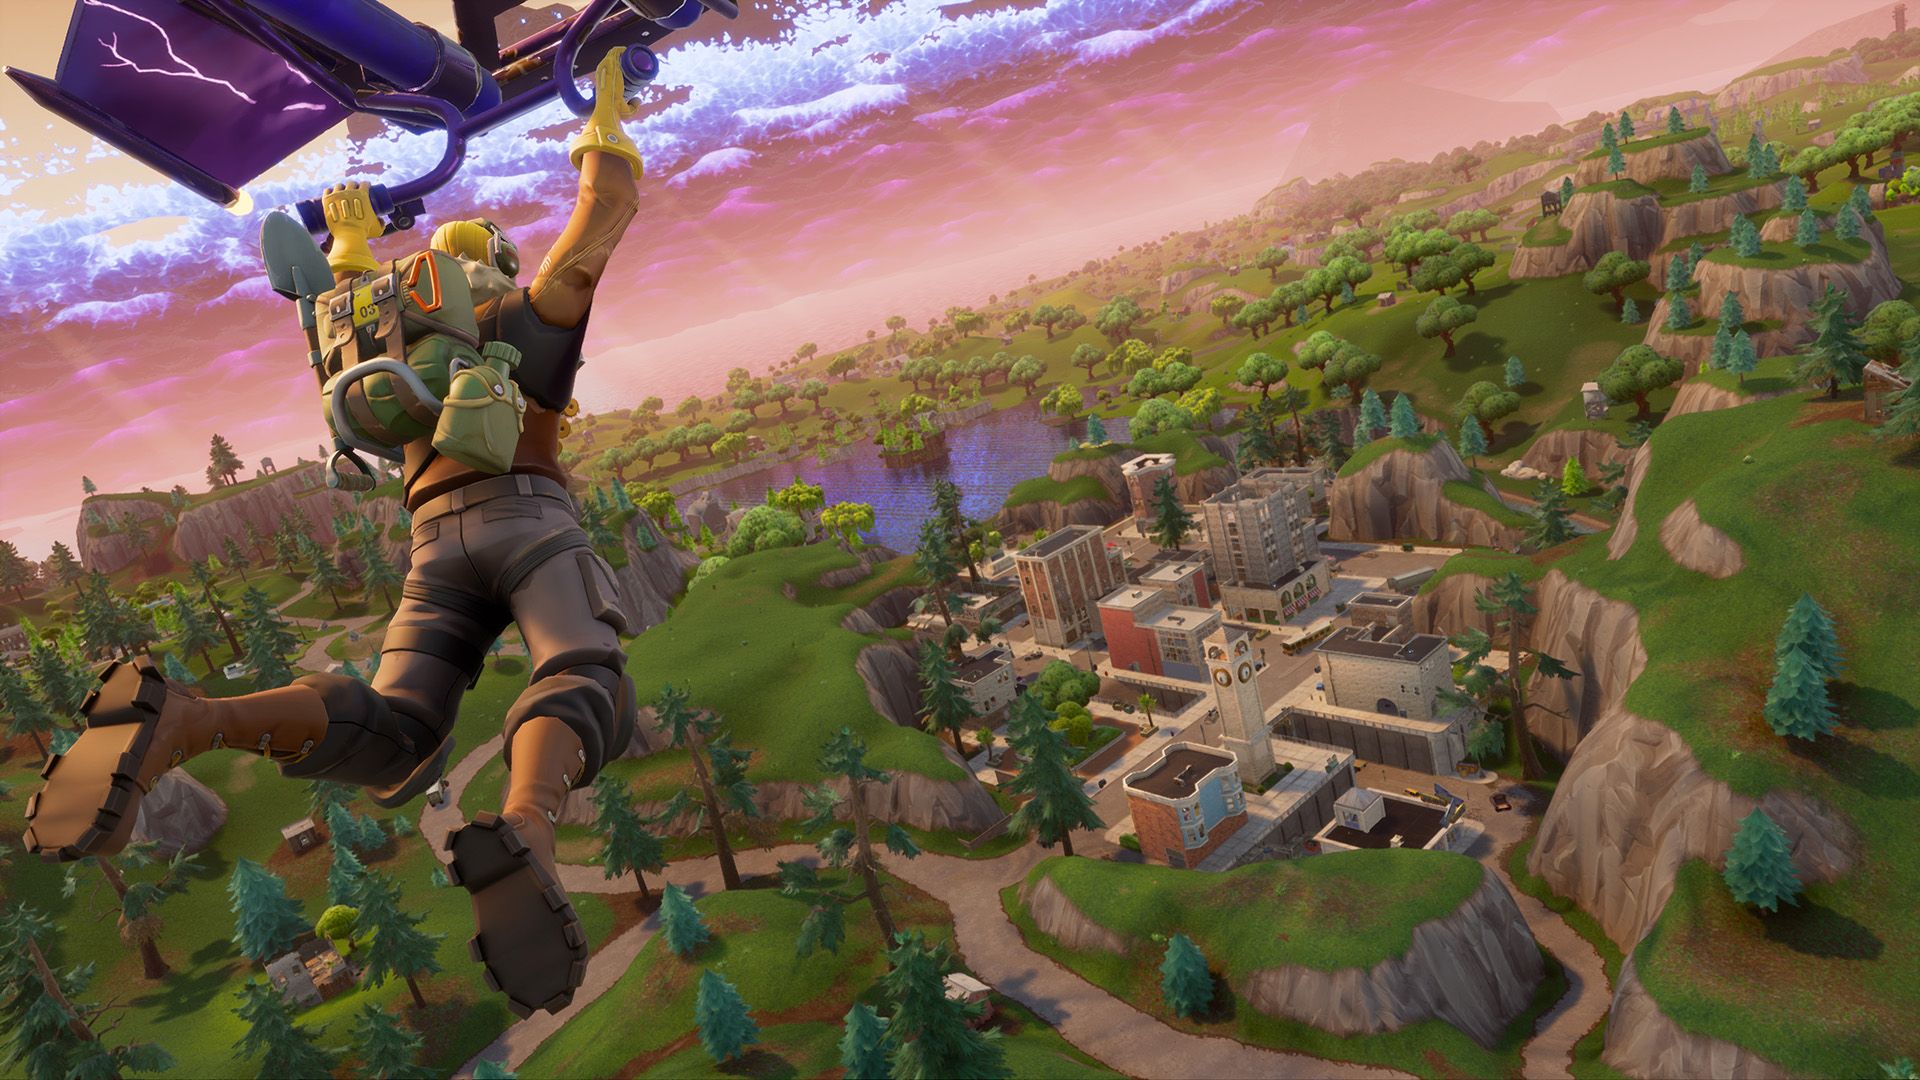 Glider re-deploy will remain in the game